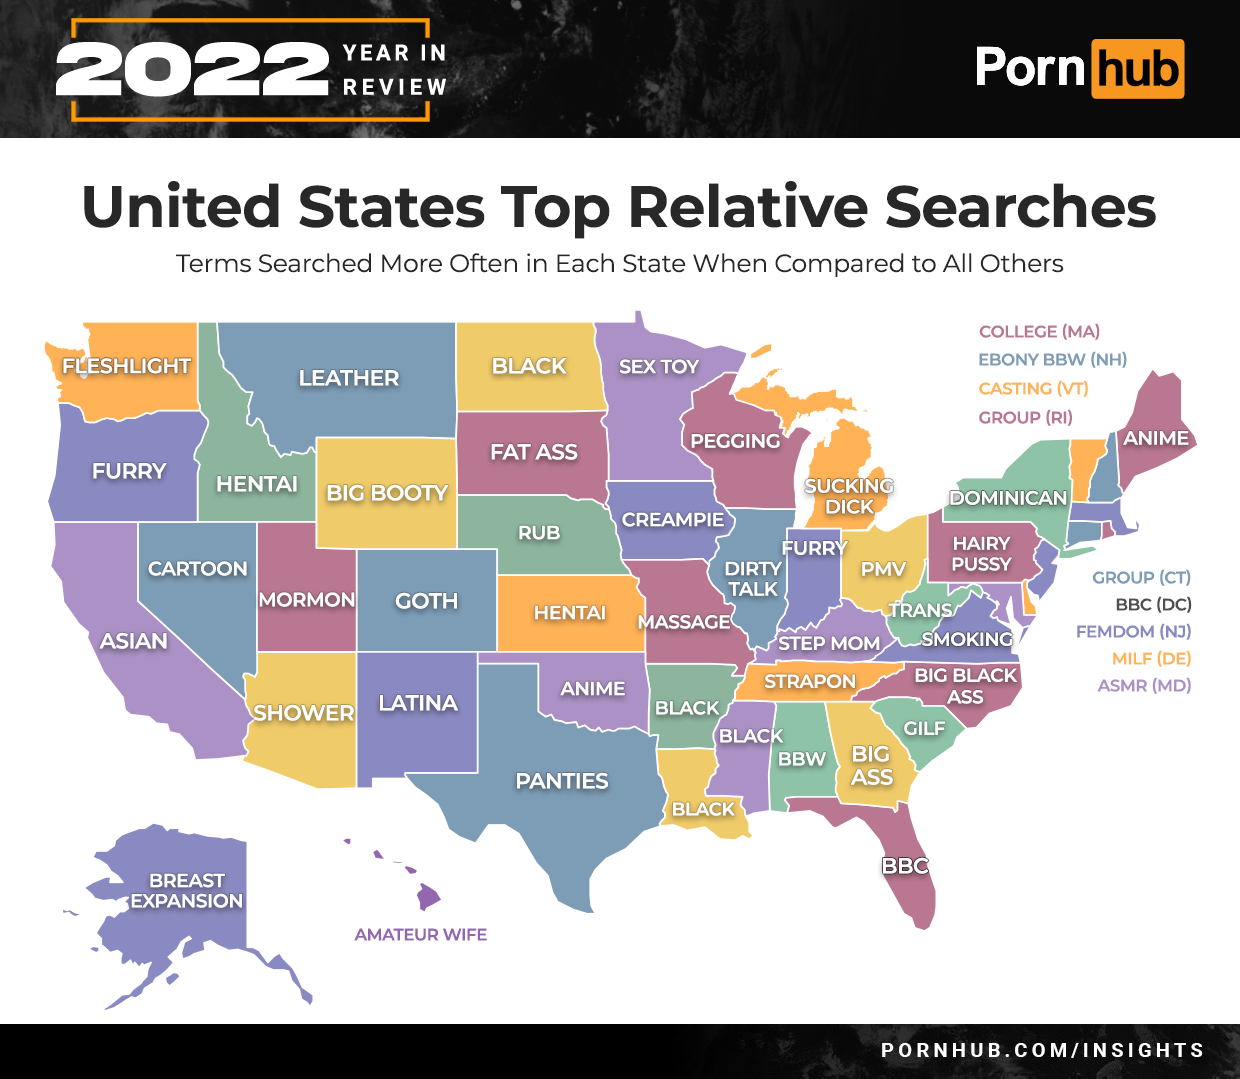 Pornhub top searches by state Wisconsin is unique r/wisconsin photo picture